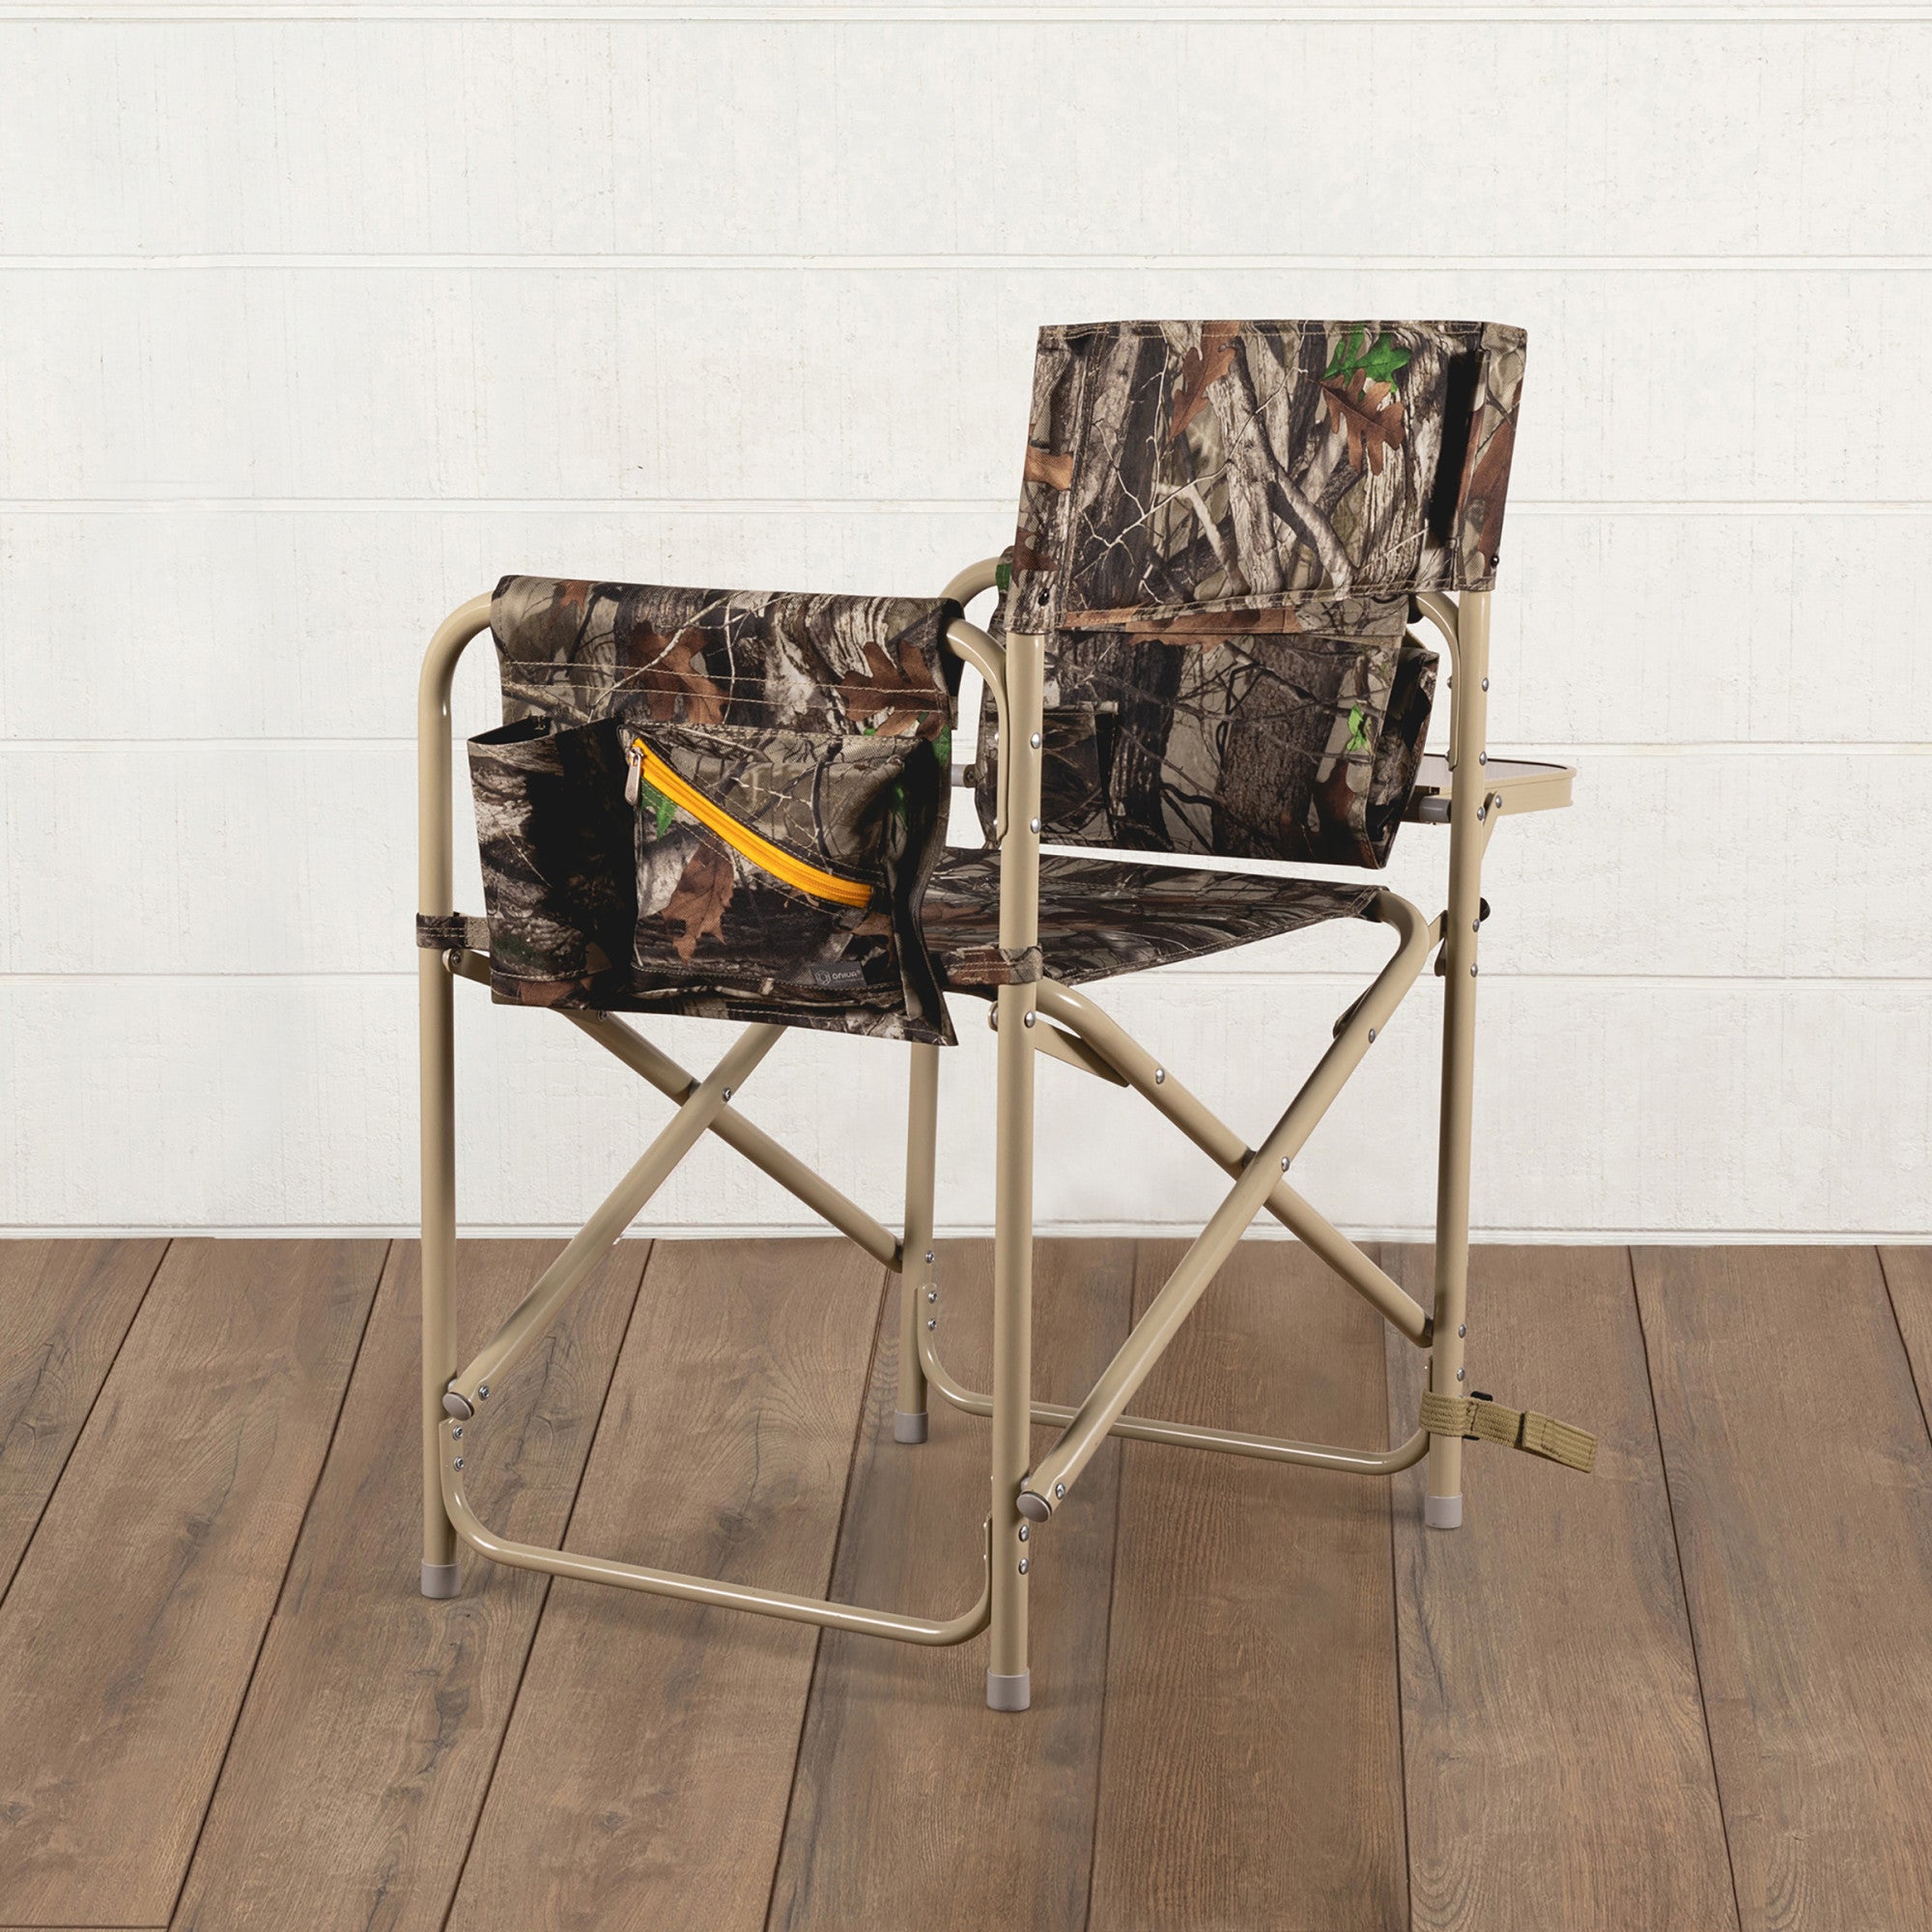 Outdoor Directors Folding Chair – PICNIC TIME FAMILY OF BRANDS